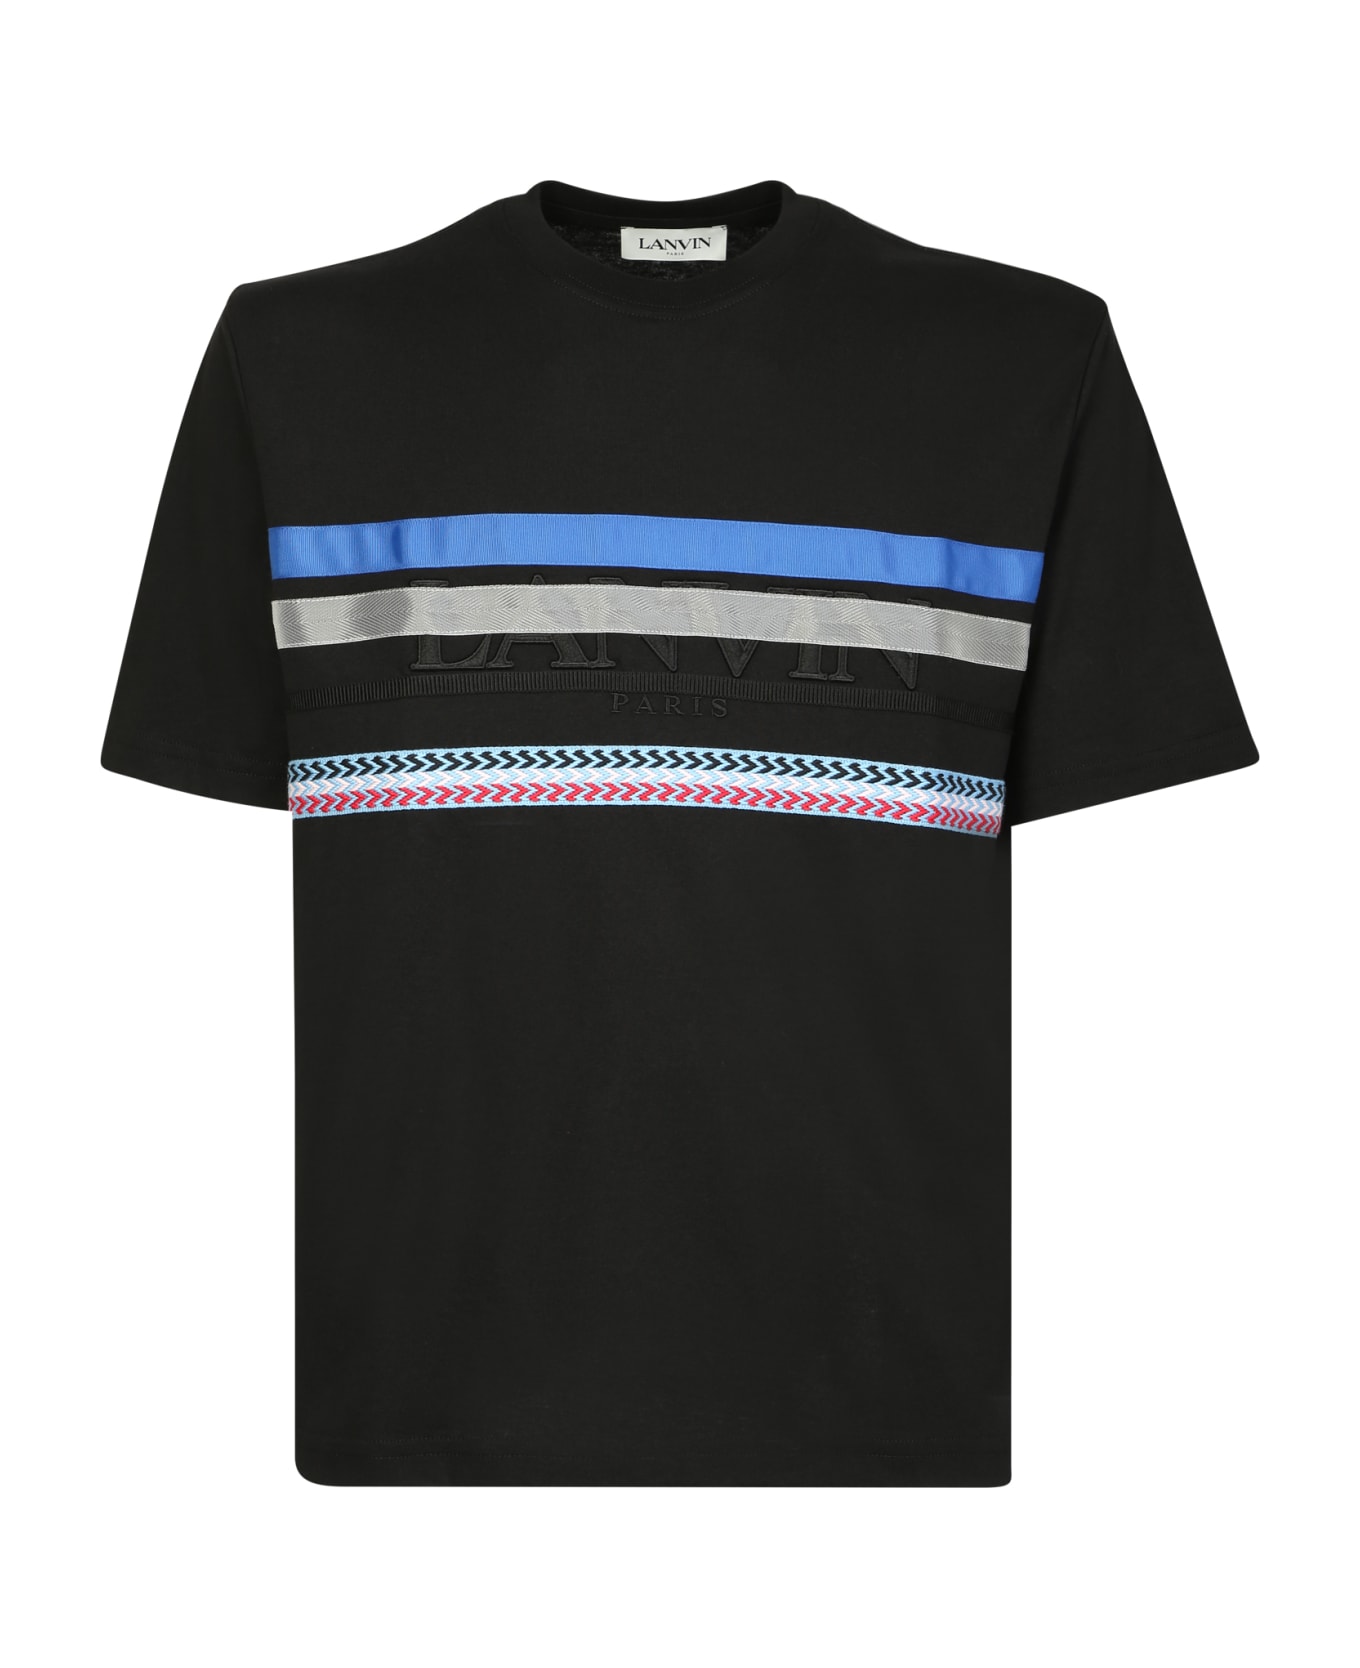 Lanvin T-shirt With Logo And Graphic Print - Black